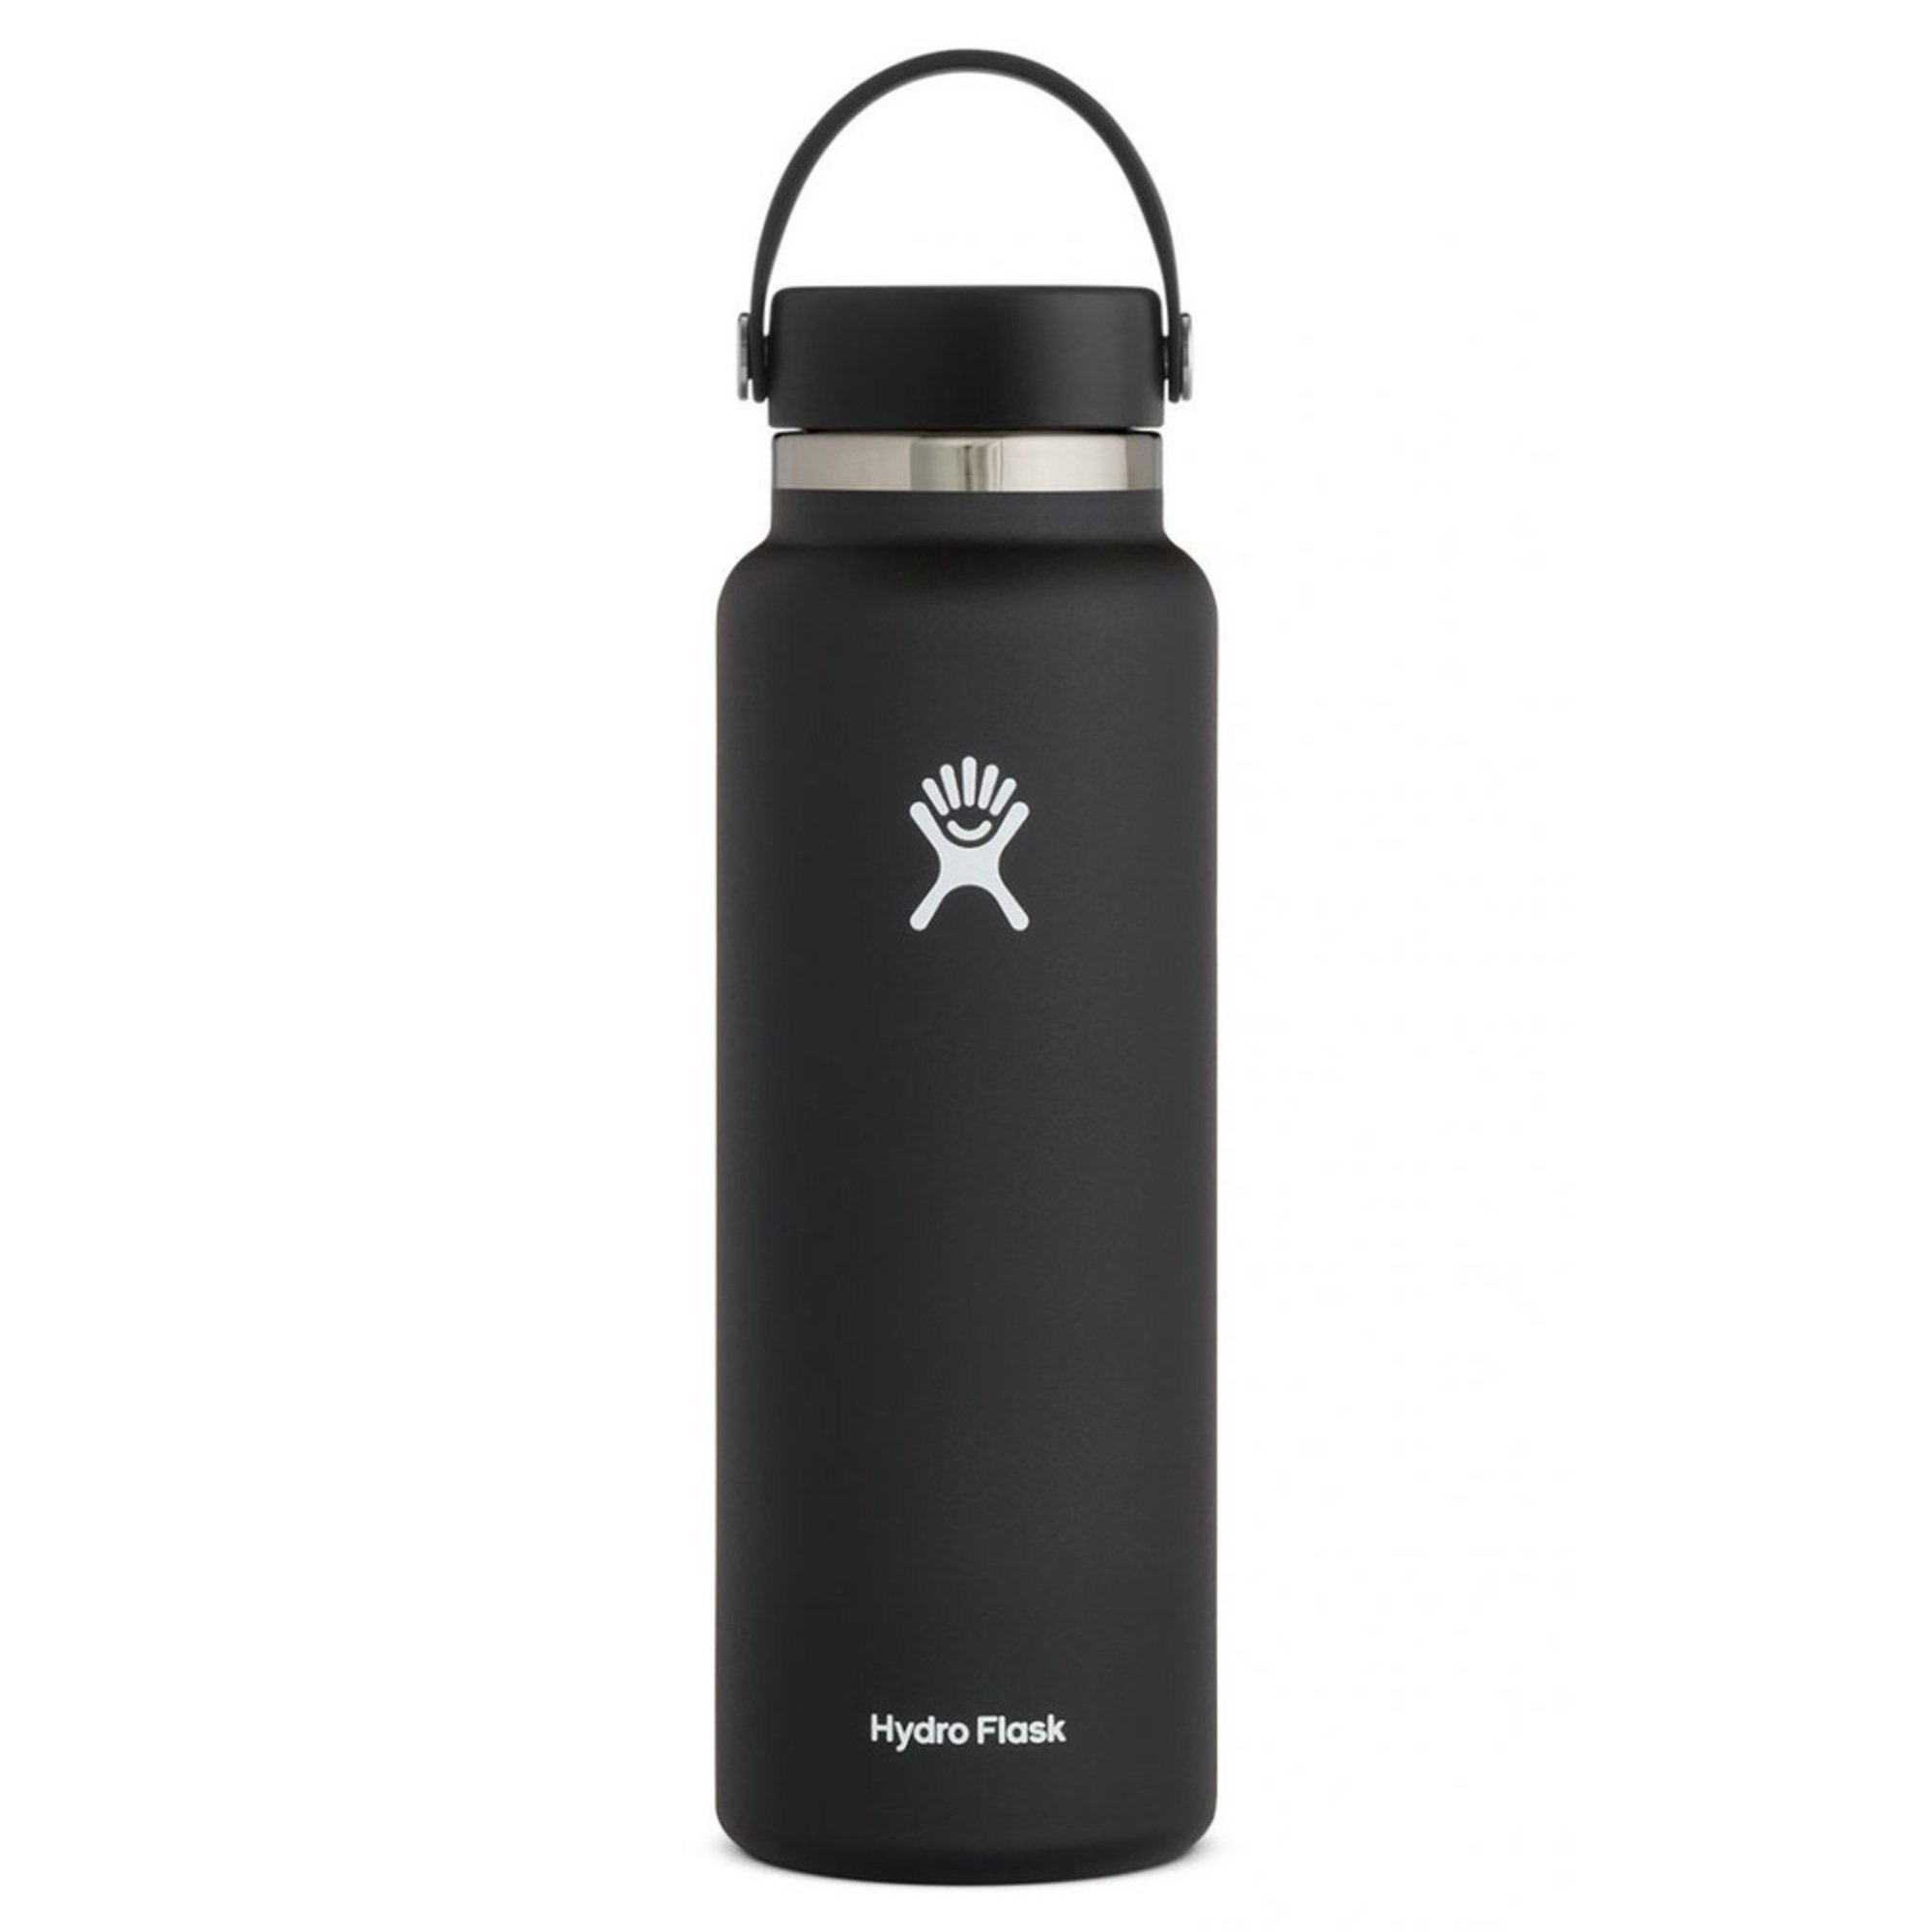 hydro flask water bottle where to buy